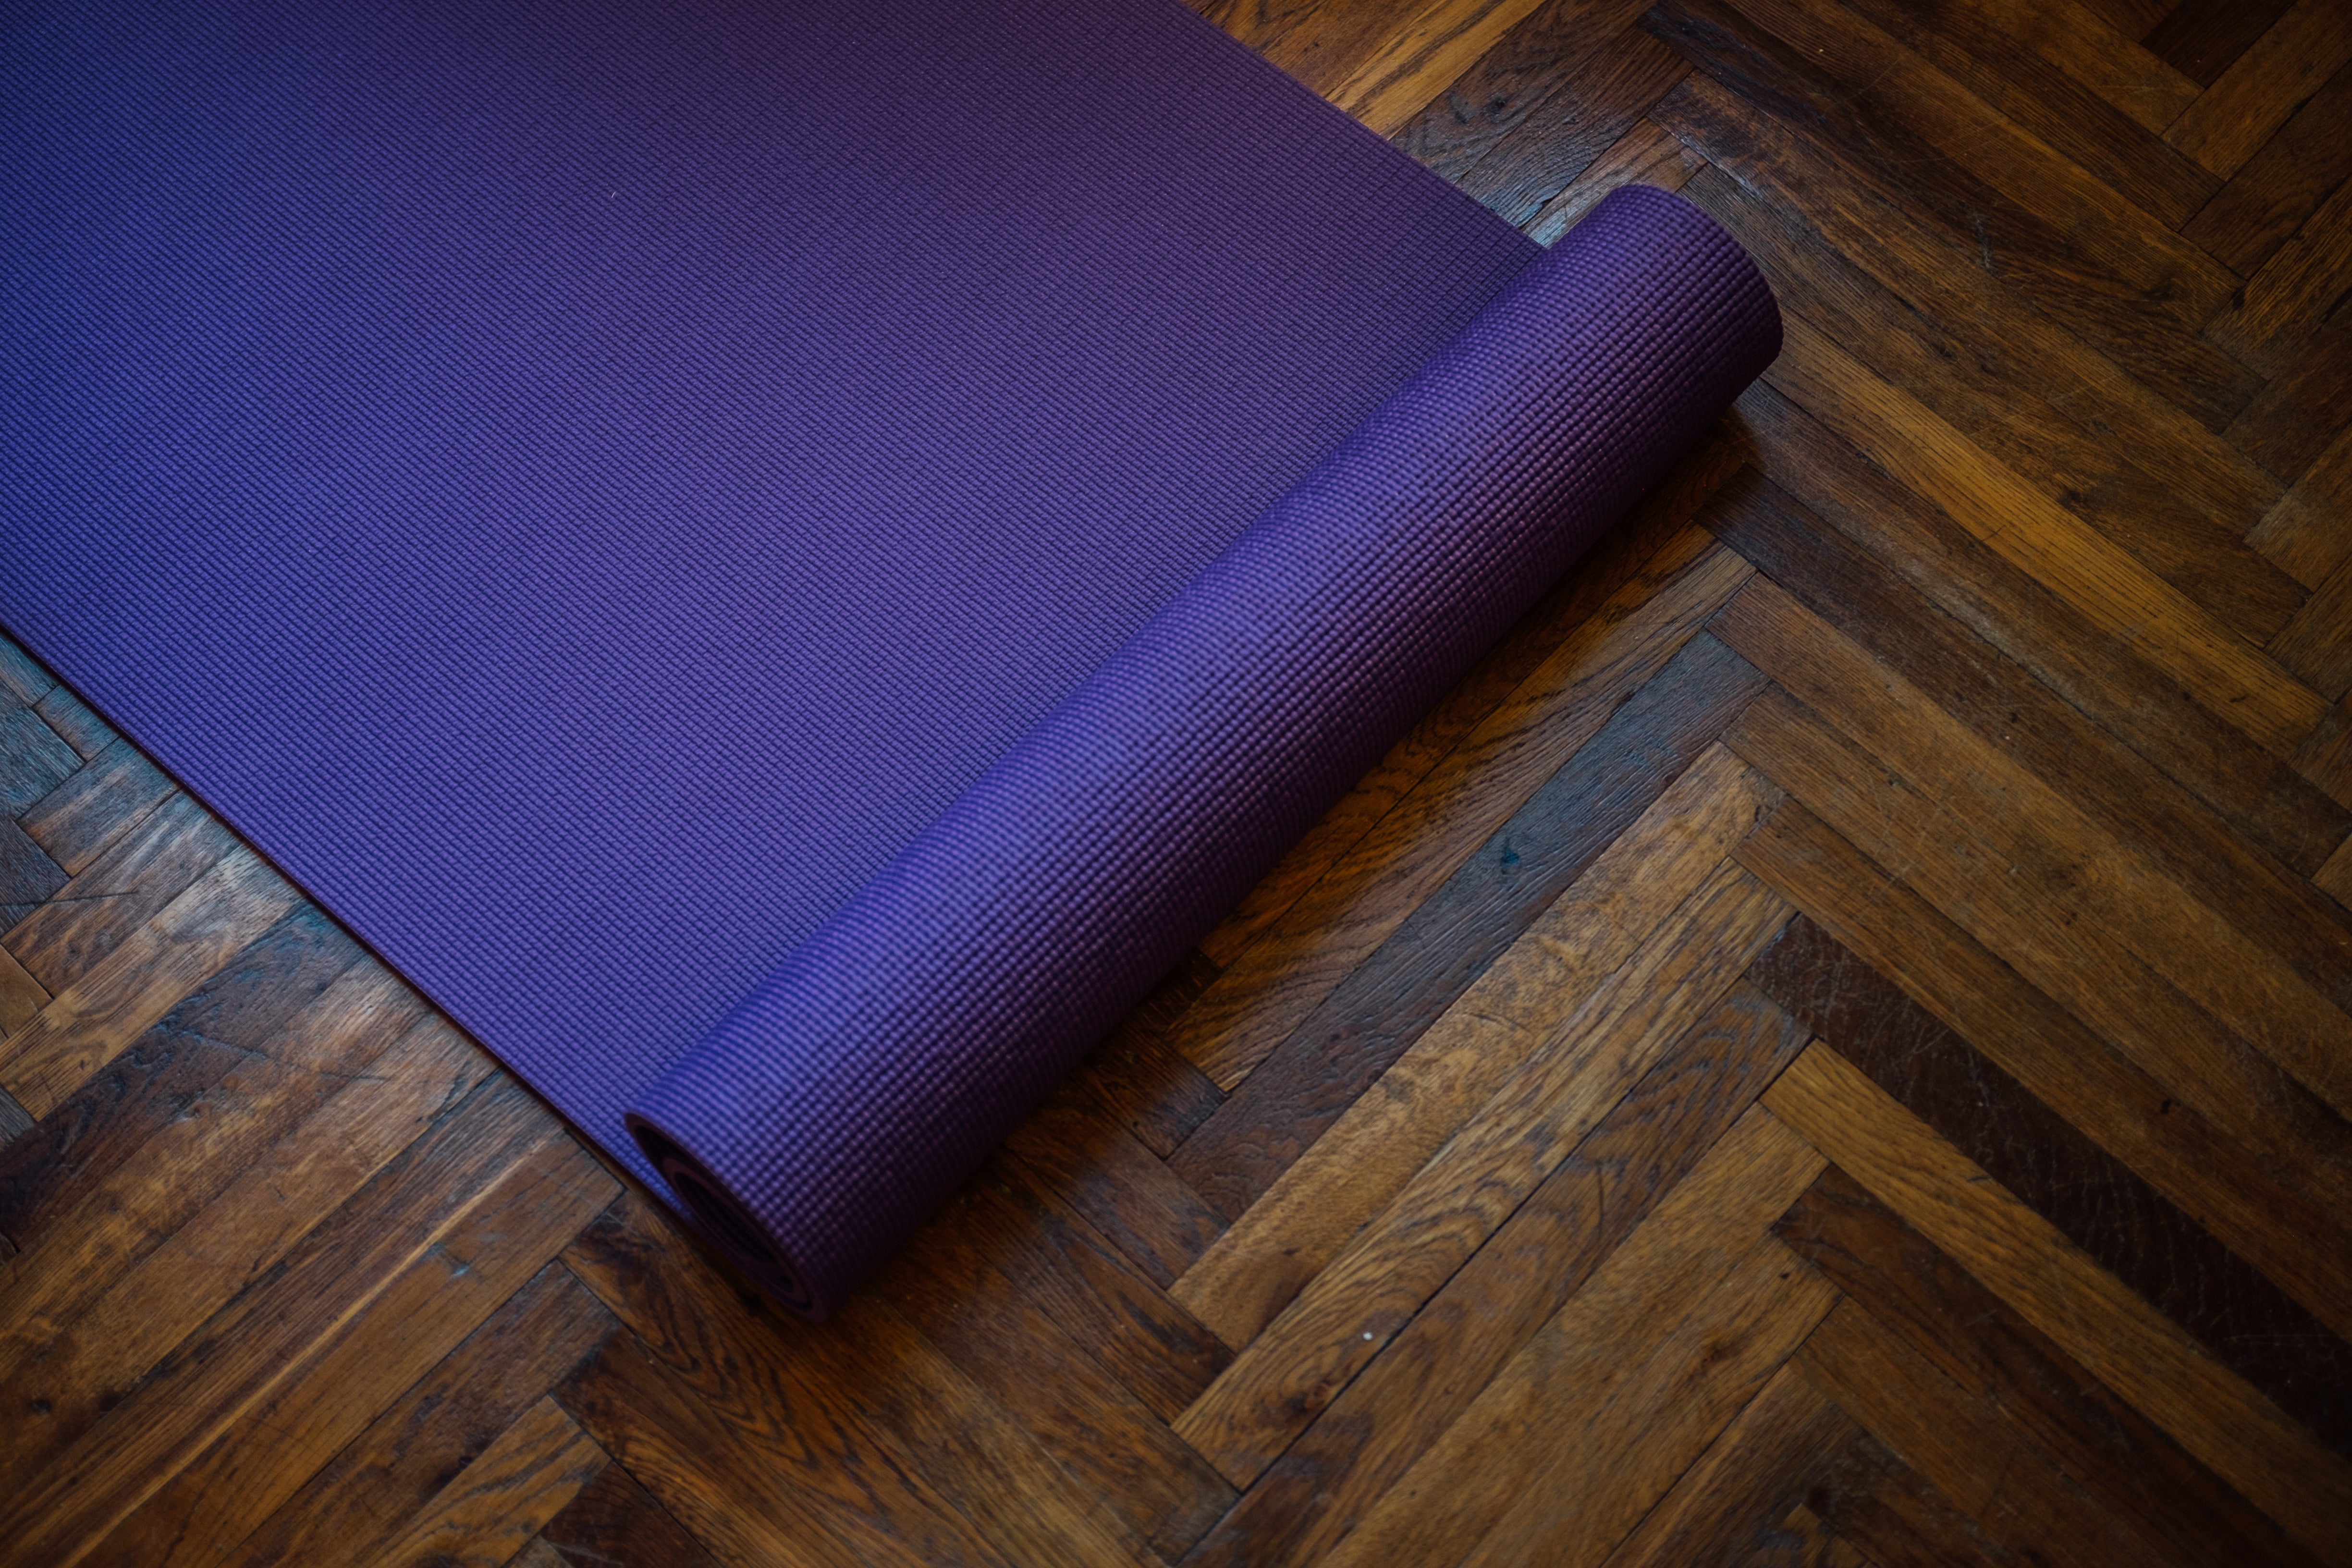 Browse Free HD Images of Purple Yoga Mat Partially Rolled On A